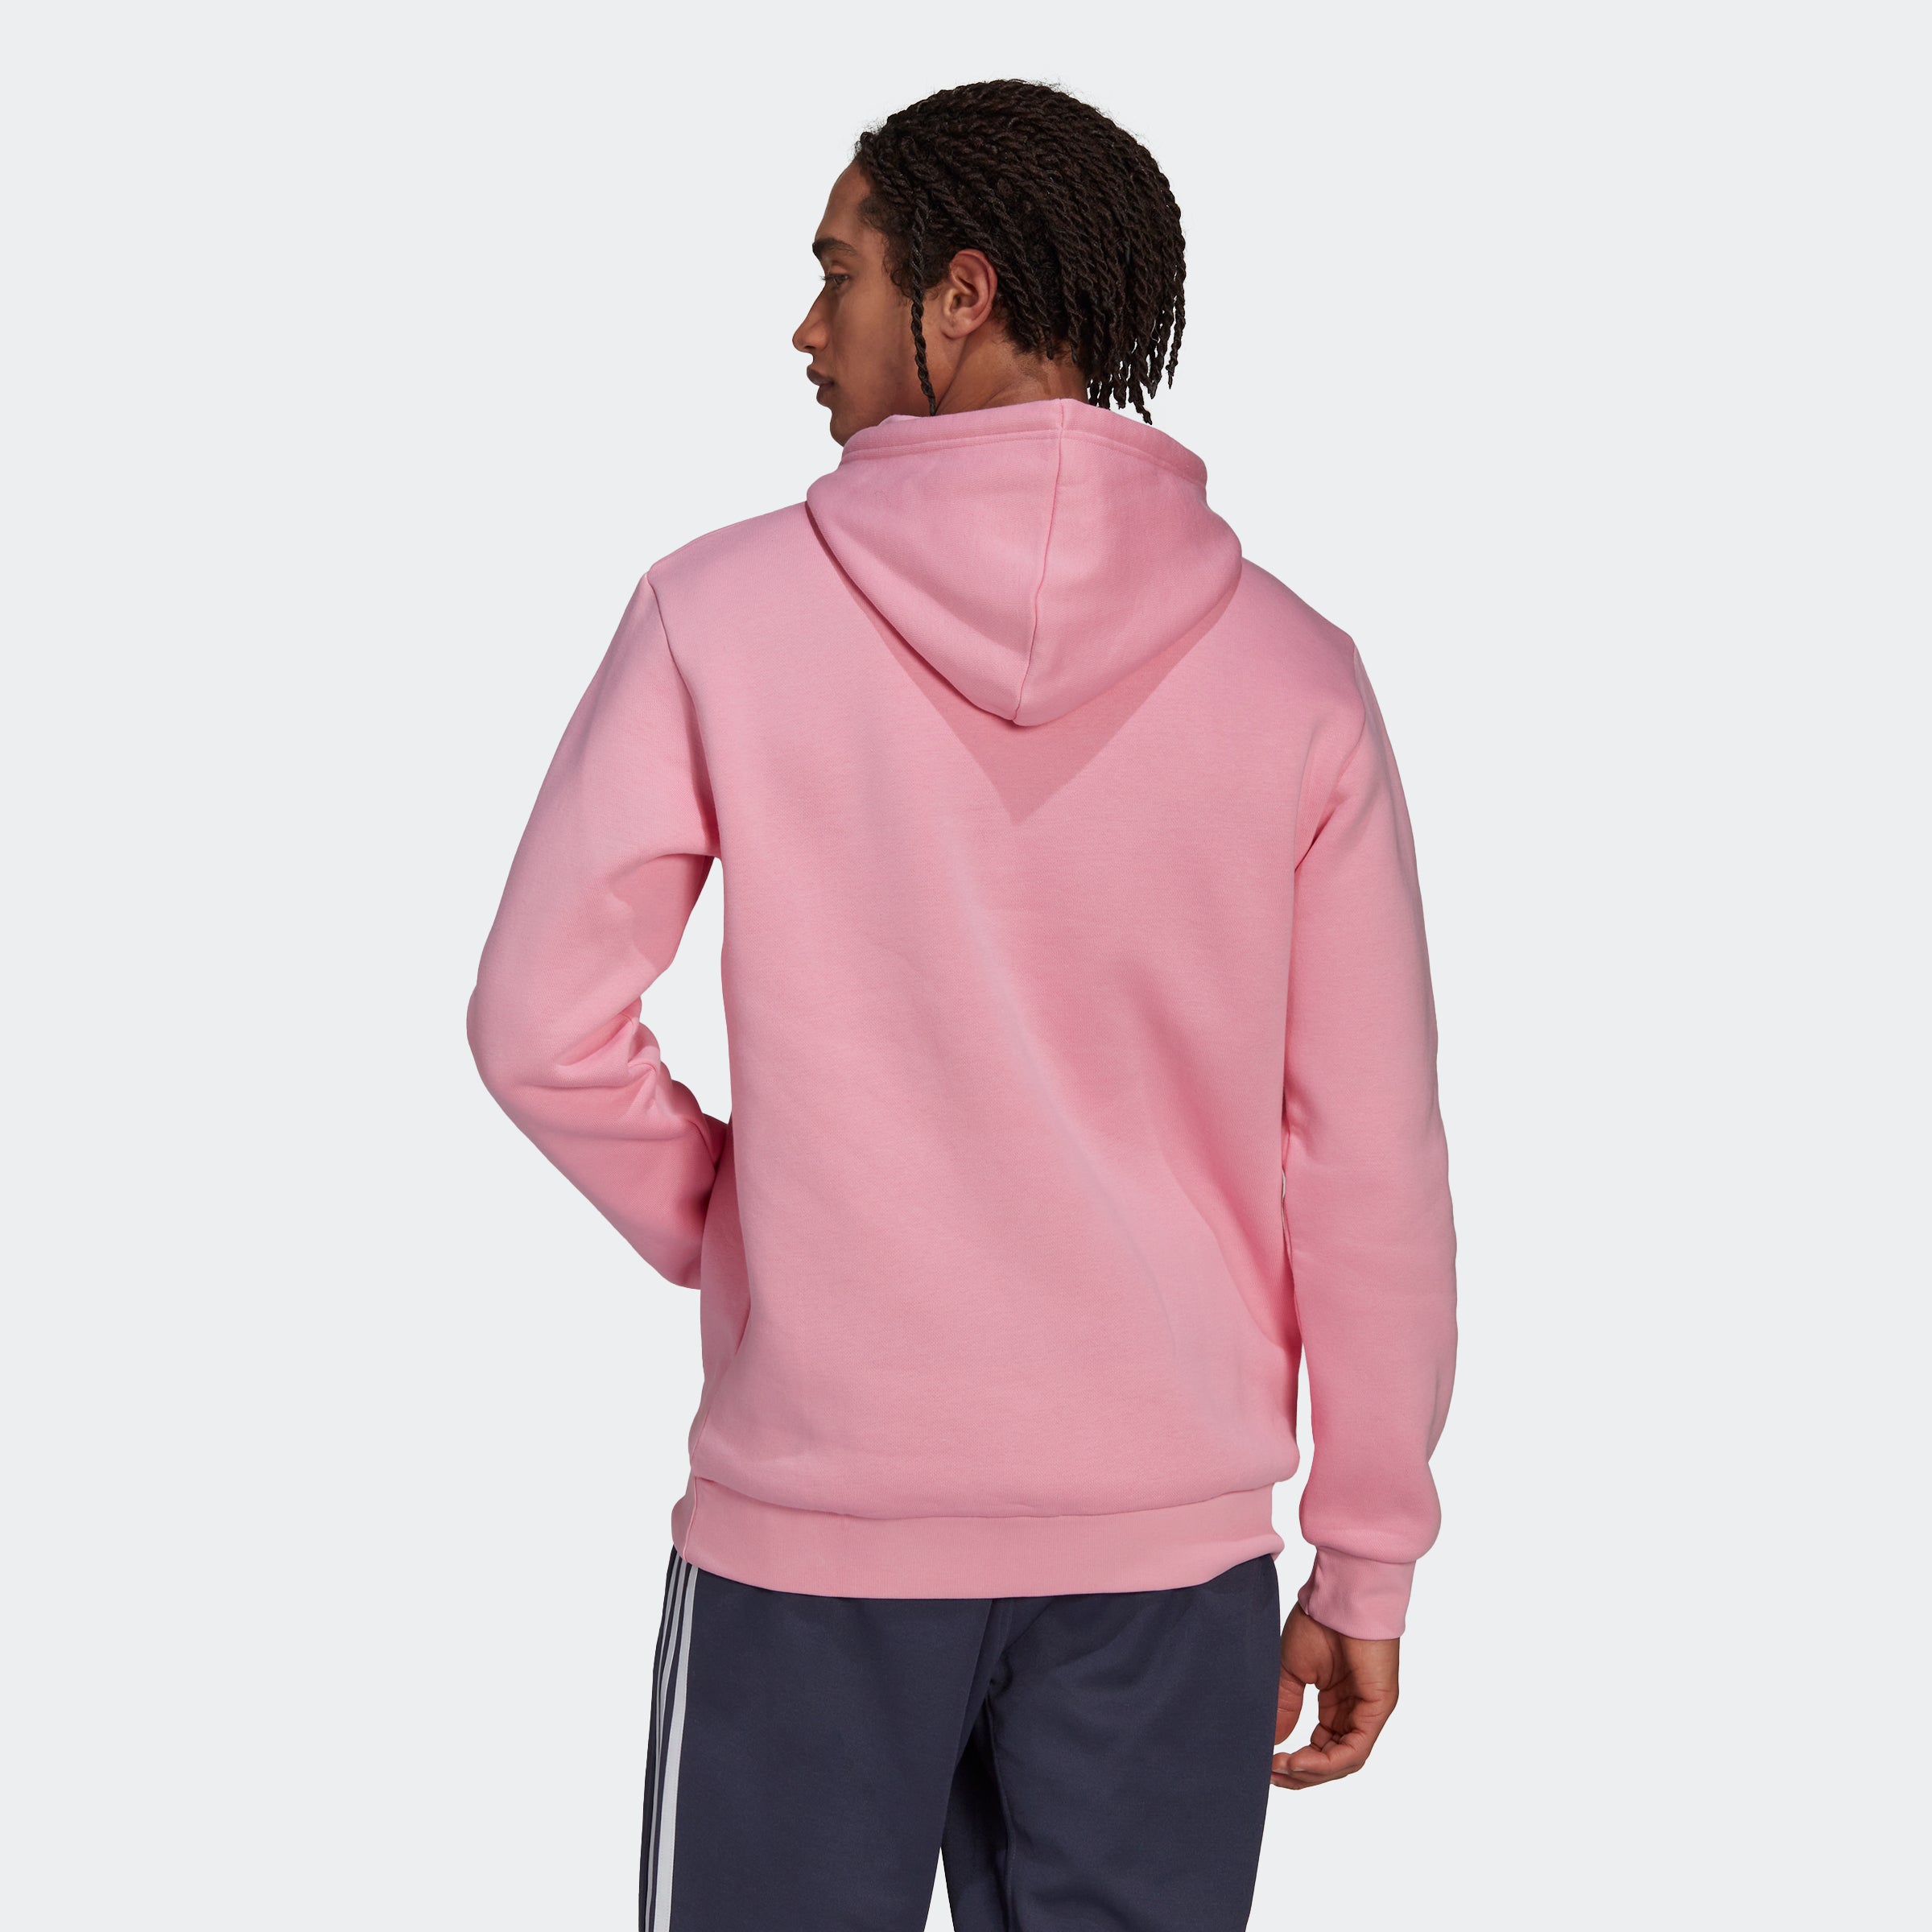 City Pink adidas | Hoodie Sports Adicolor Bliss Trefoil Chicago